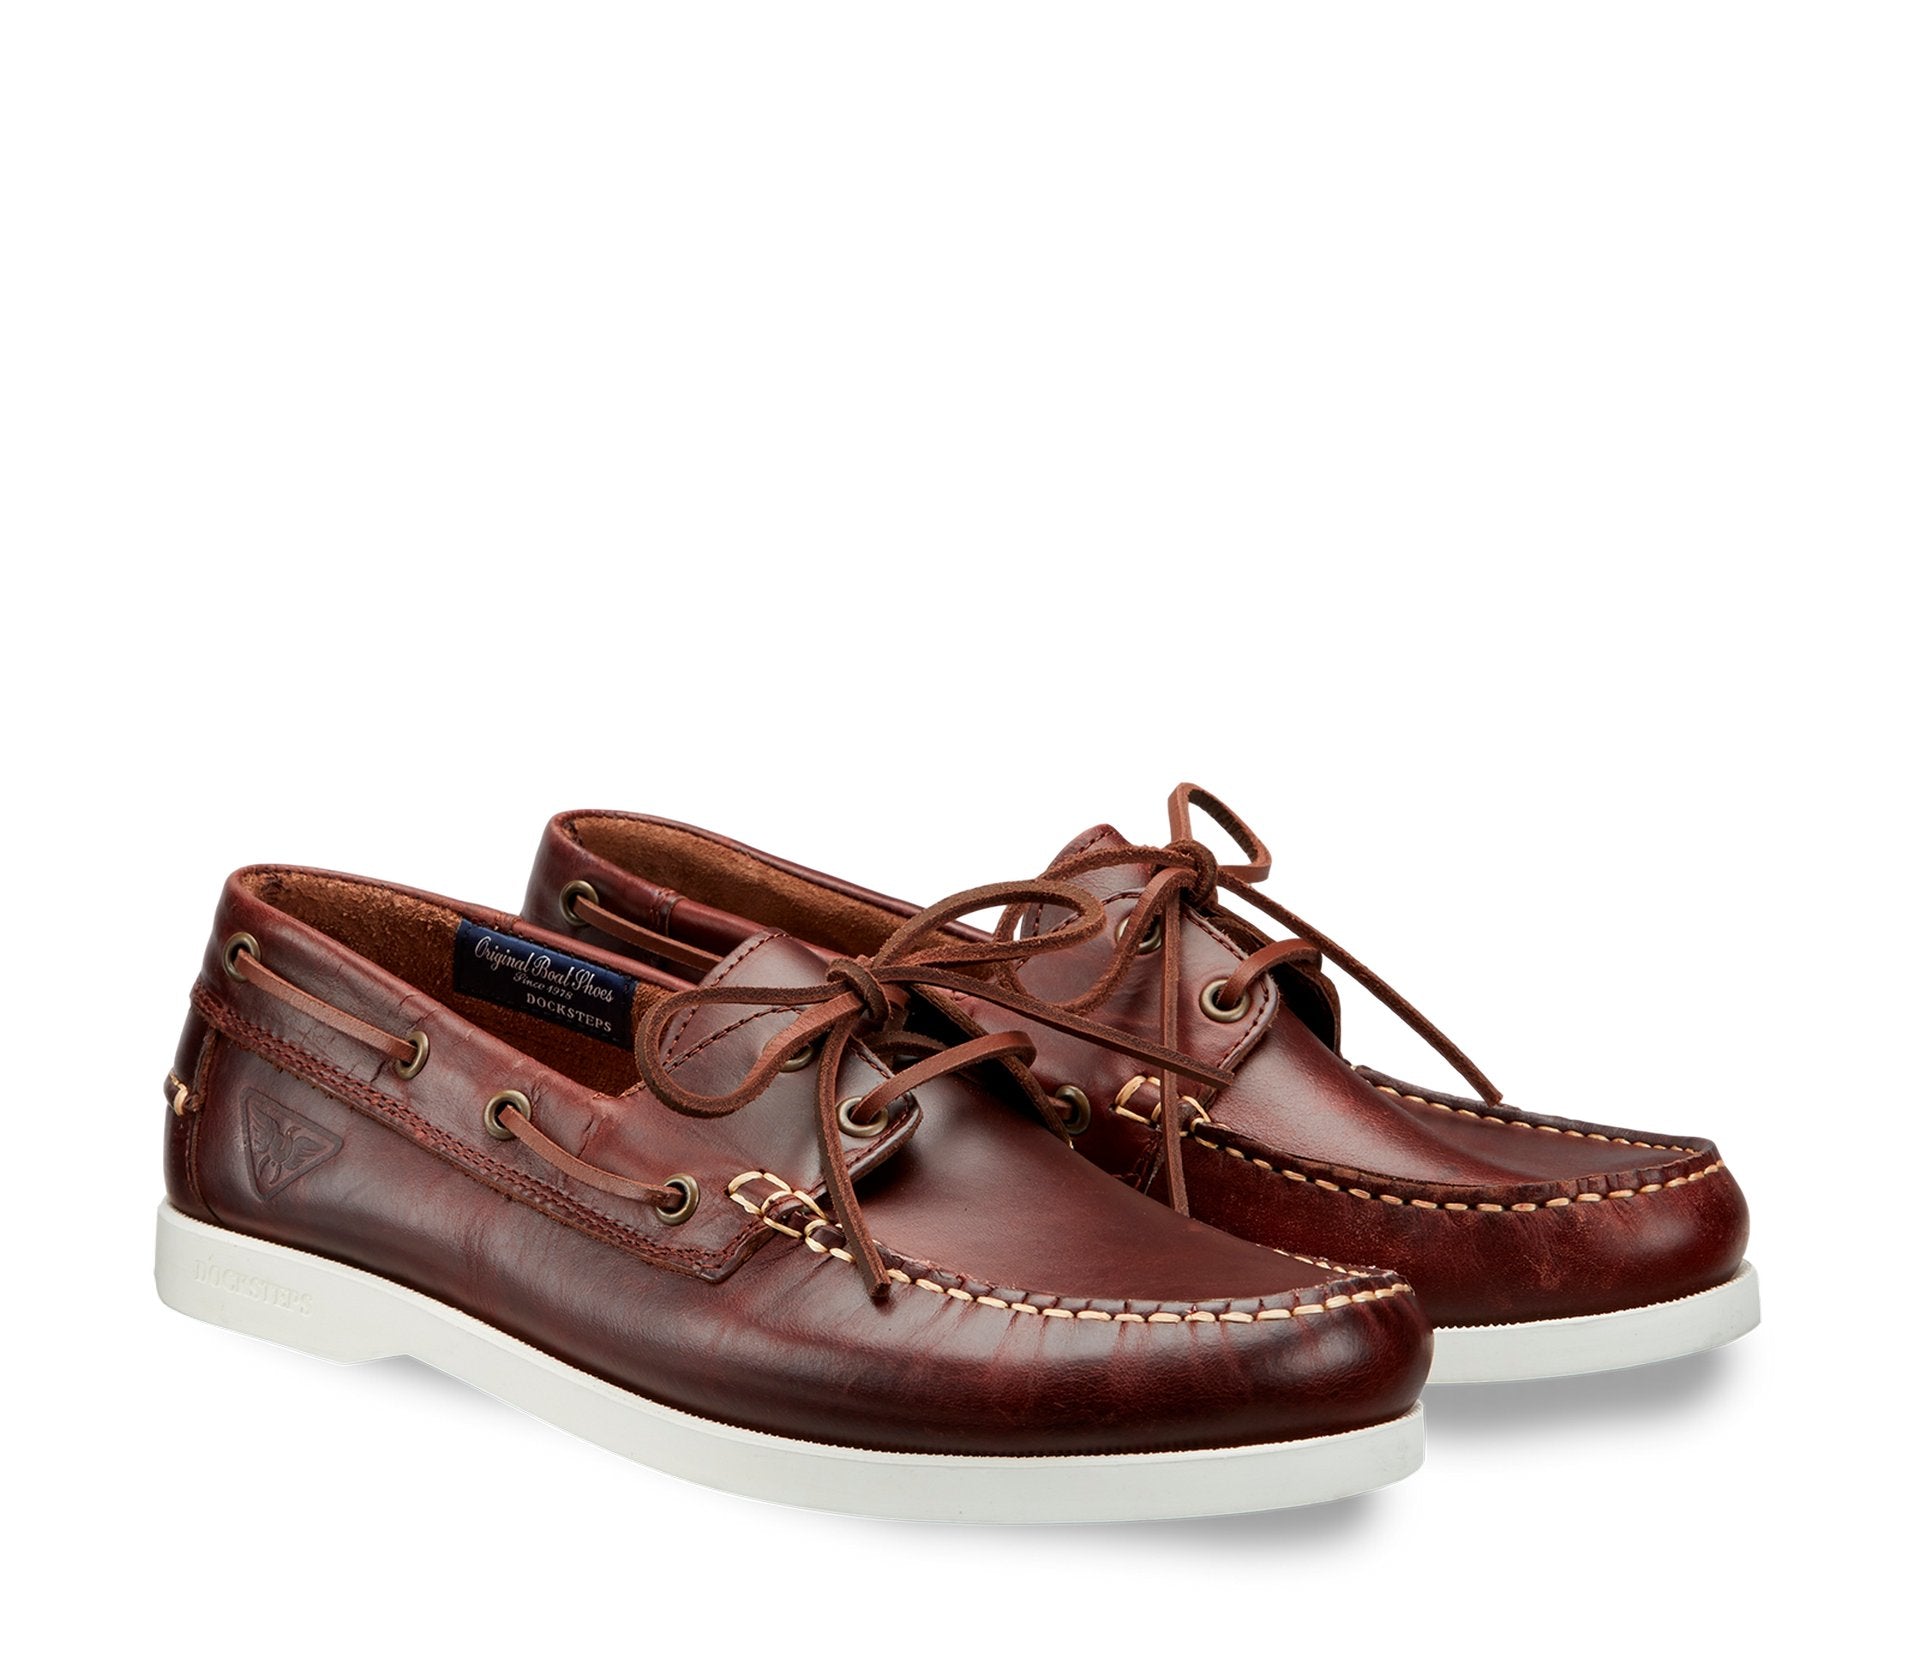 Men's Laced Leather Boat Shoes